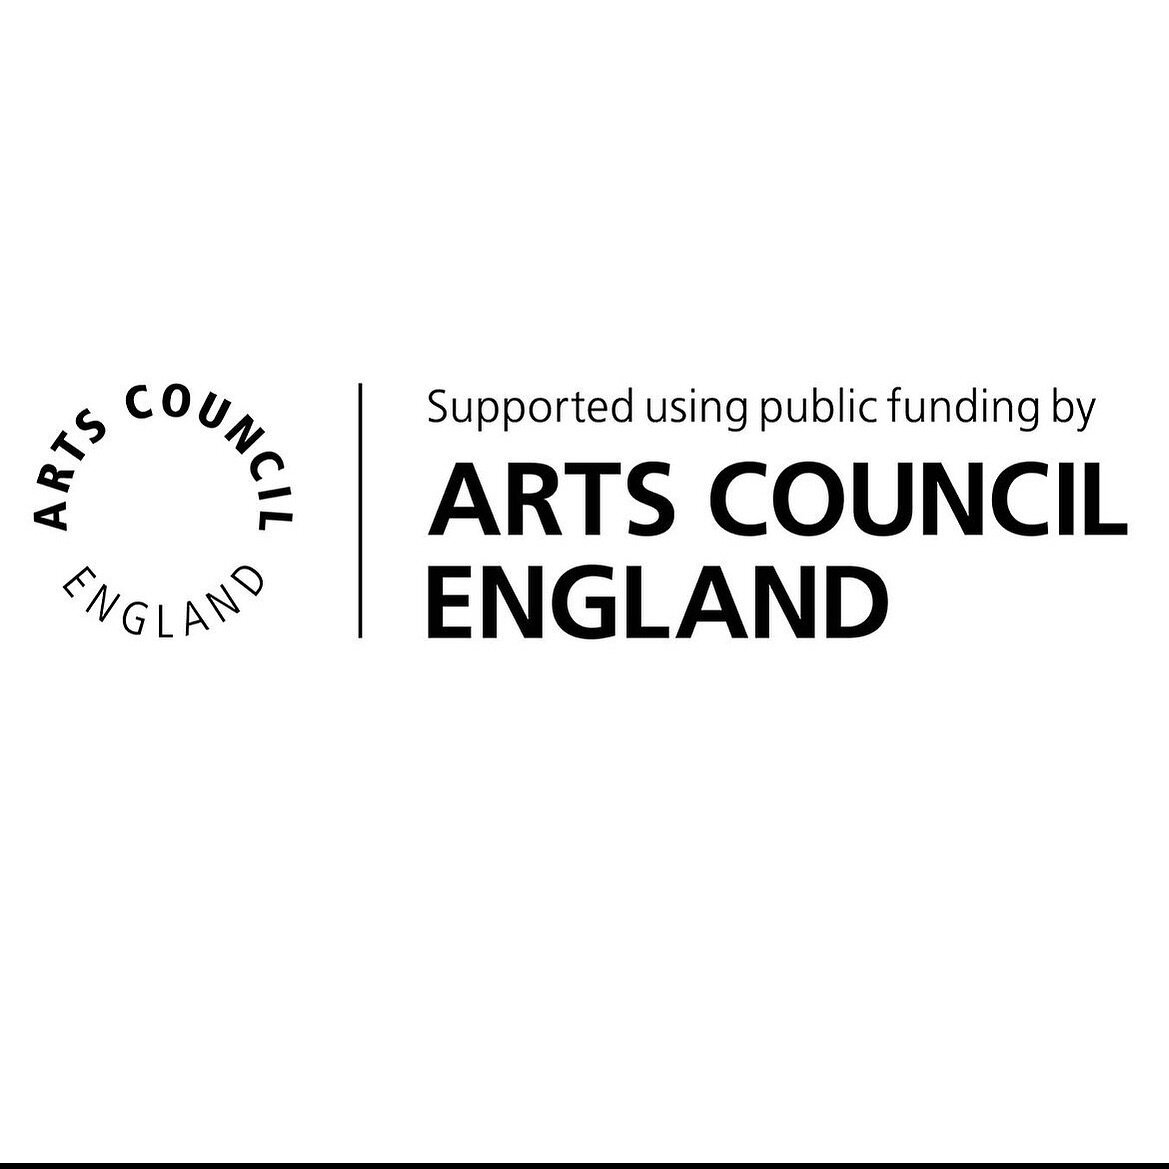 Literally still cannot believe it but I was awarded a Developing Your Creative Practice grant from @aceagrams 😭😭❤️ 

I am constantly humbled and amazed to receive support from a country I am still quite new to. (especially from the same council tha